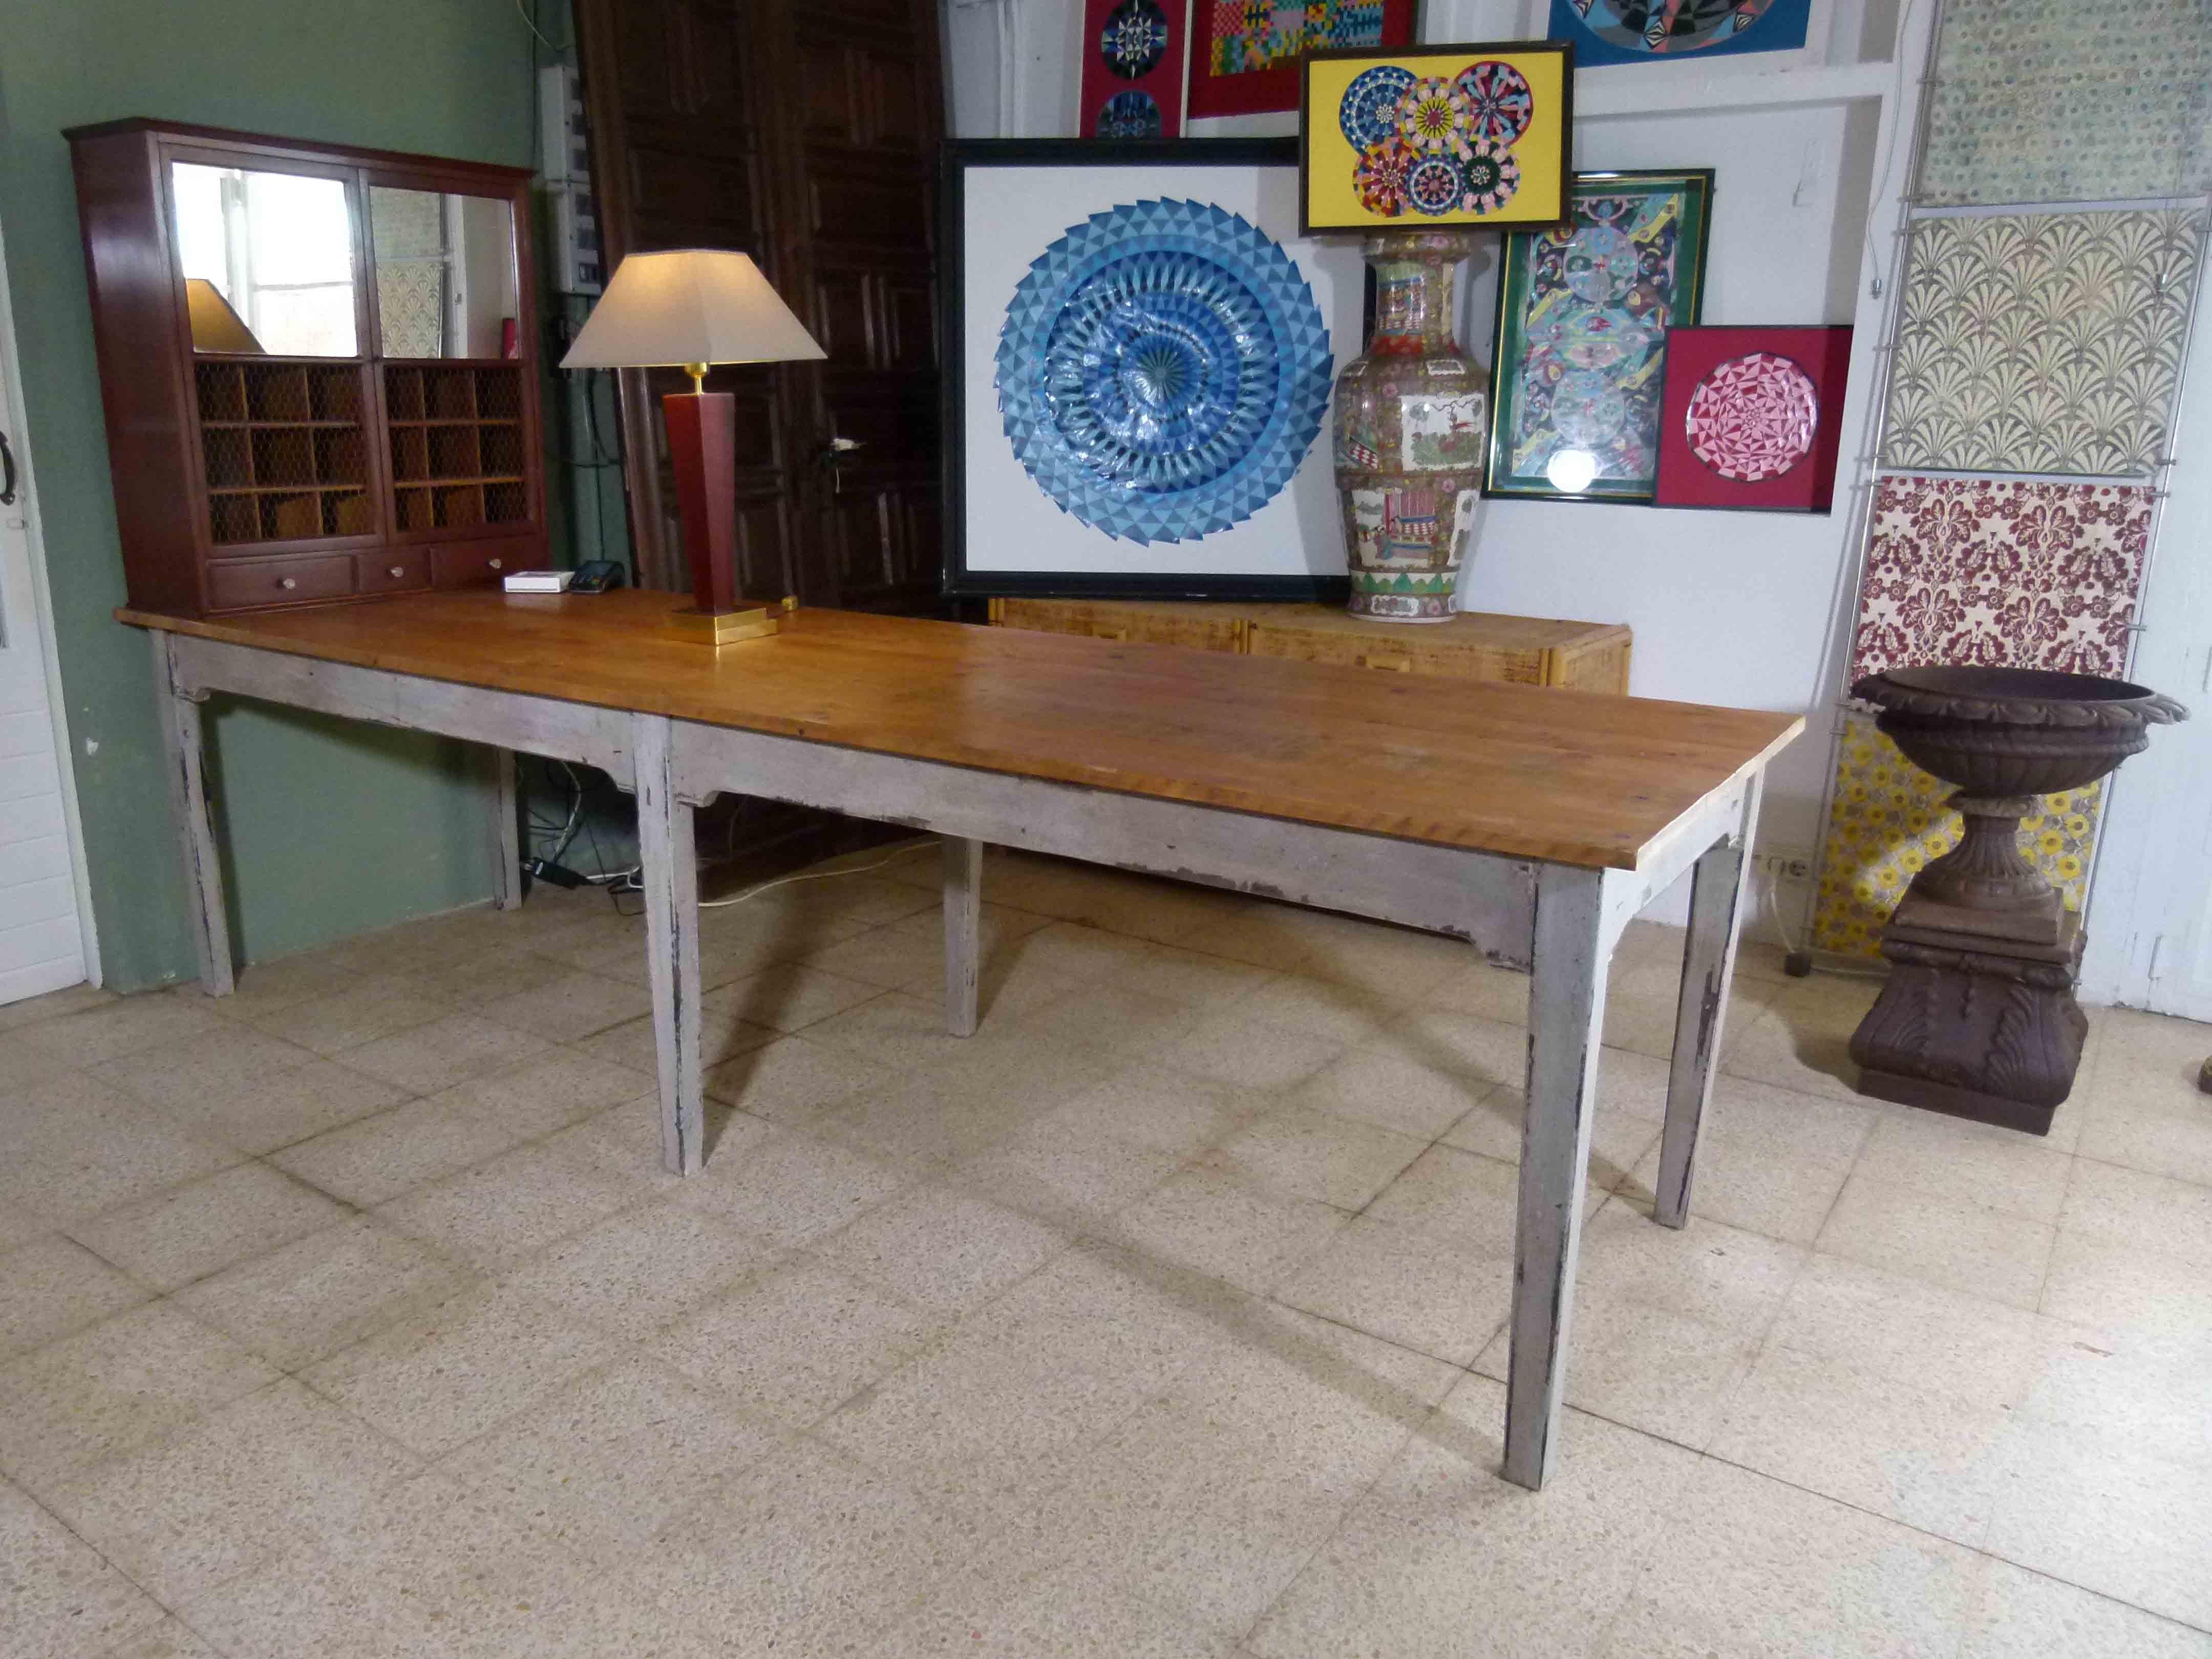 Large rustic 20th century dining table.  The base is patinated in grey blue an  the top is left with its natural wood color.
 